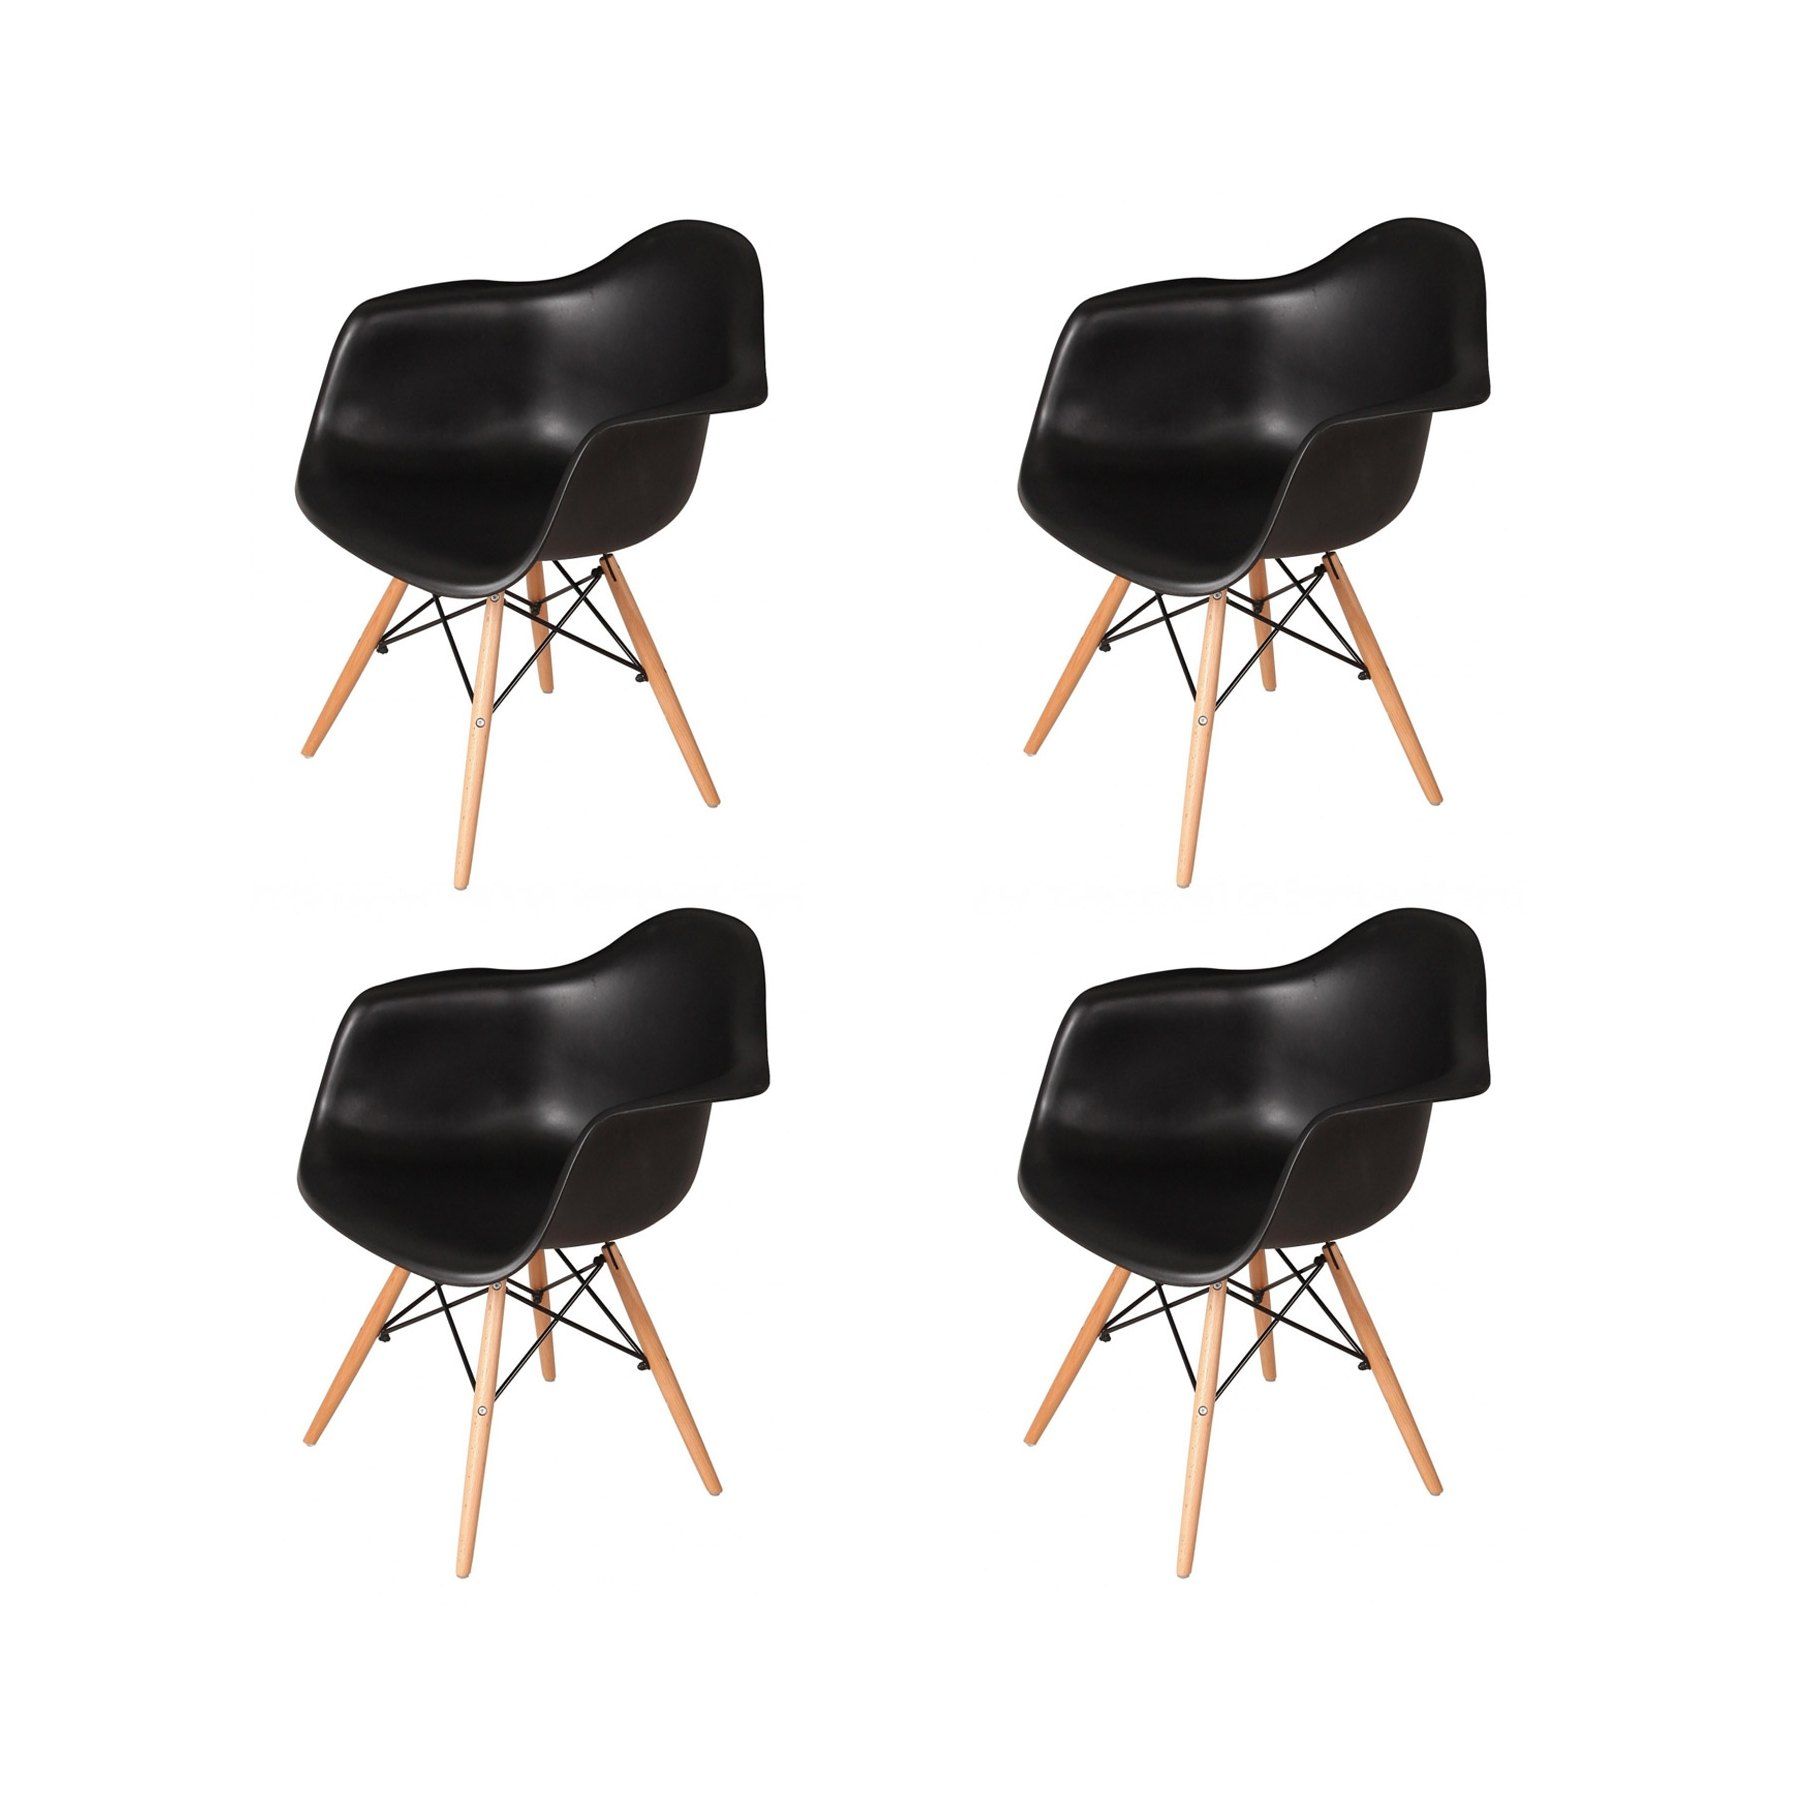 PACK 4 SILLONES TOWER WOOD NEGROS